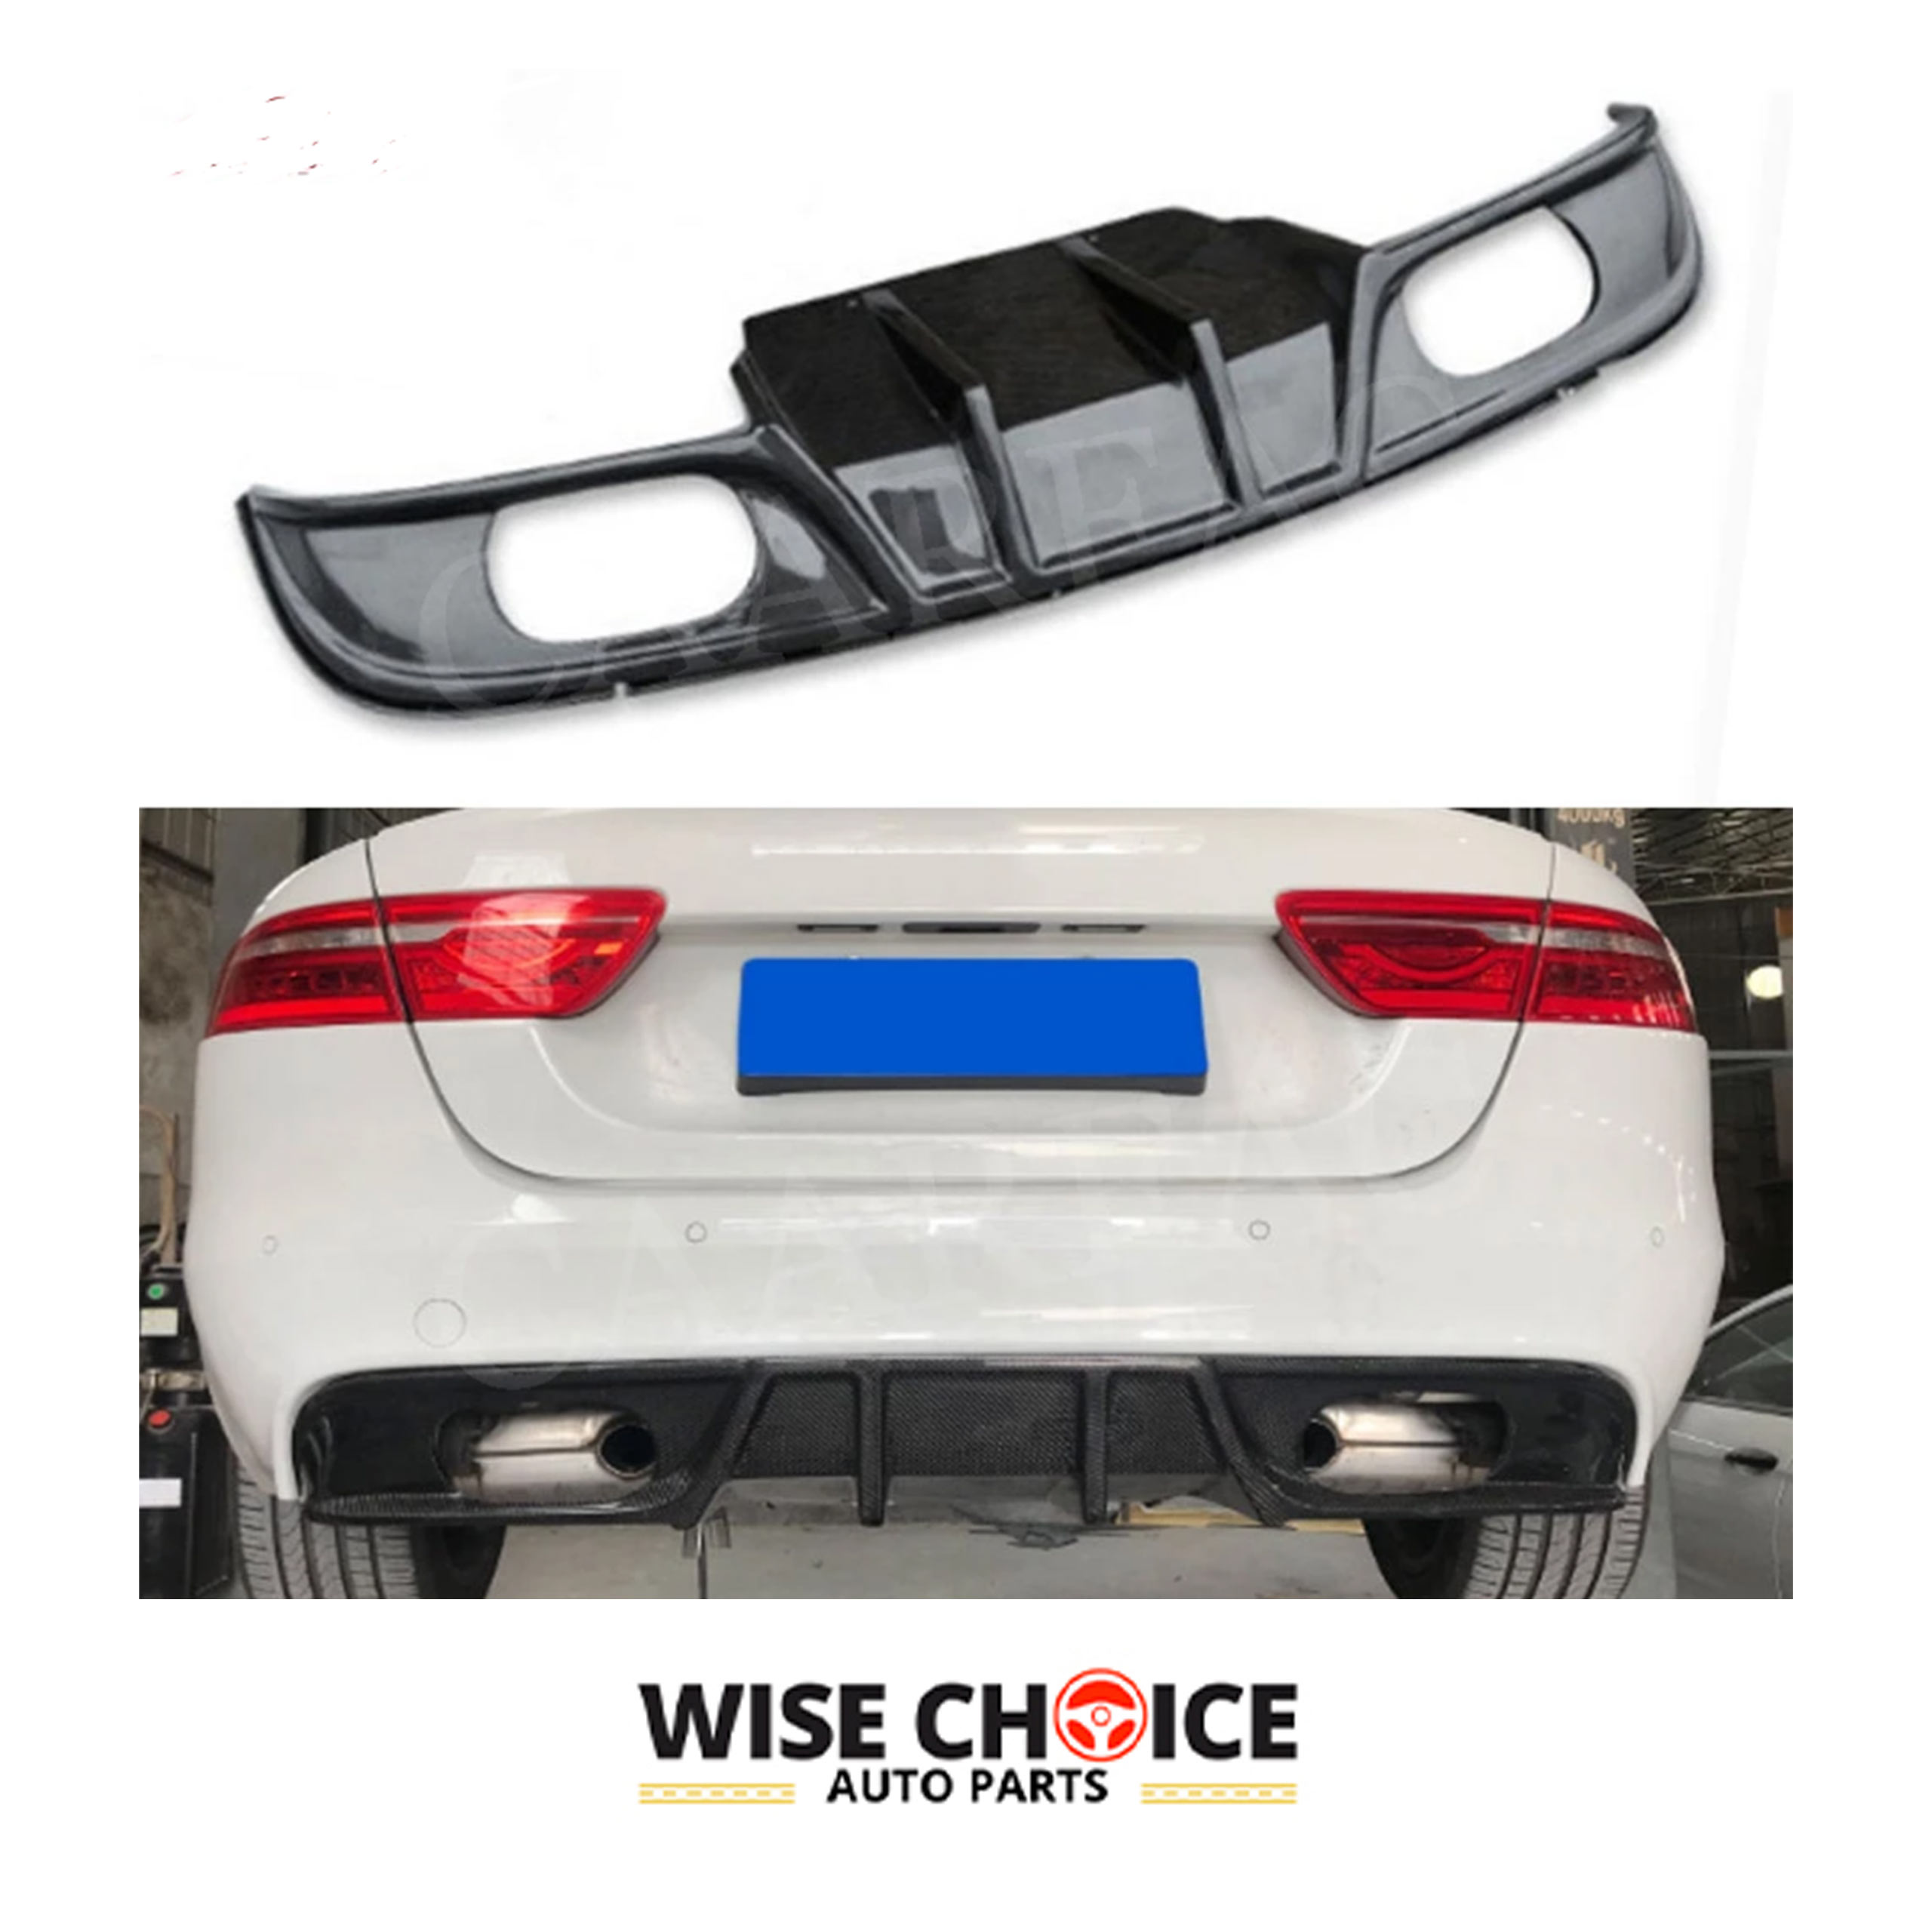 2017-2019 Jaguar XE Sedan with high-quality carbon fiber rear diffuser installed, enhancing the vehicle's aggressive stance and aerodynamics.